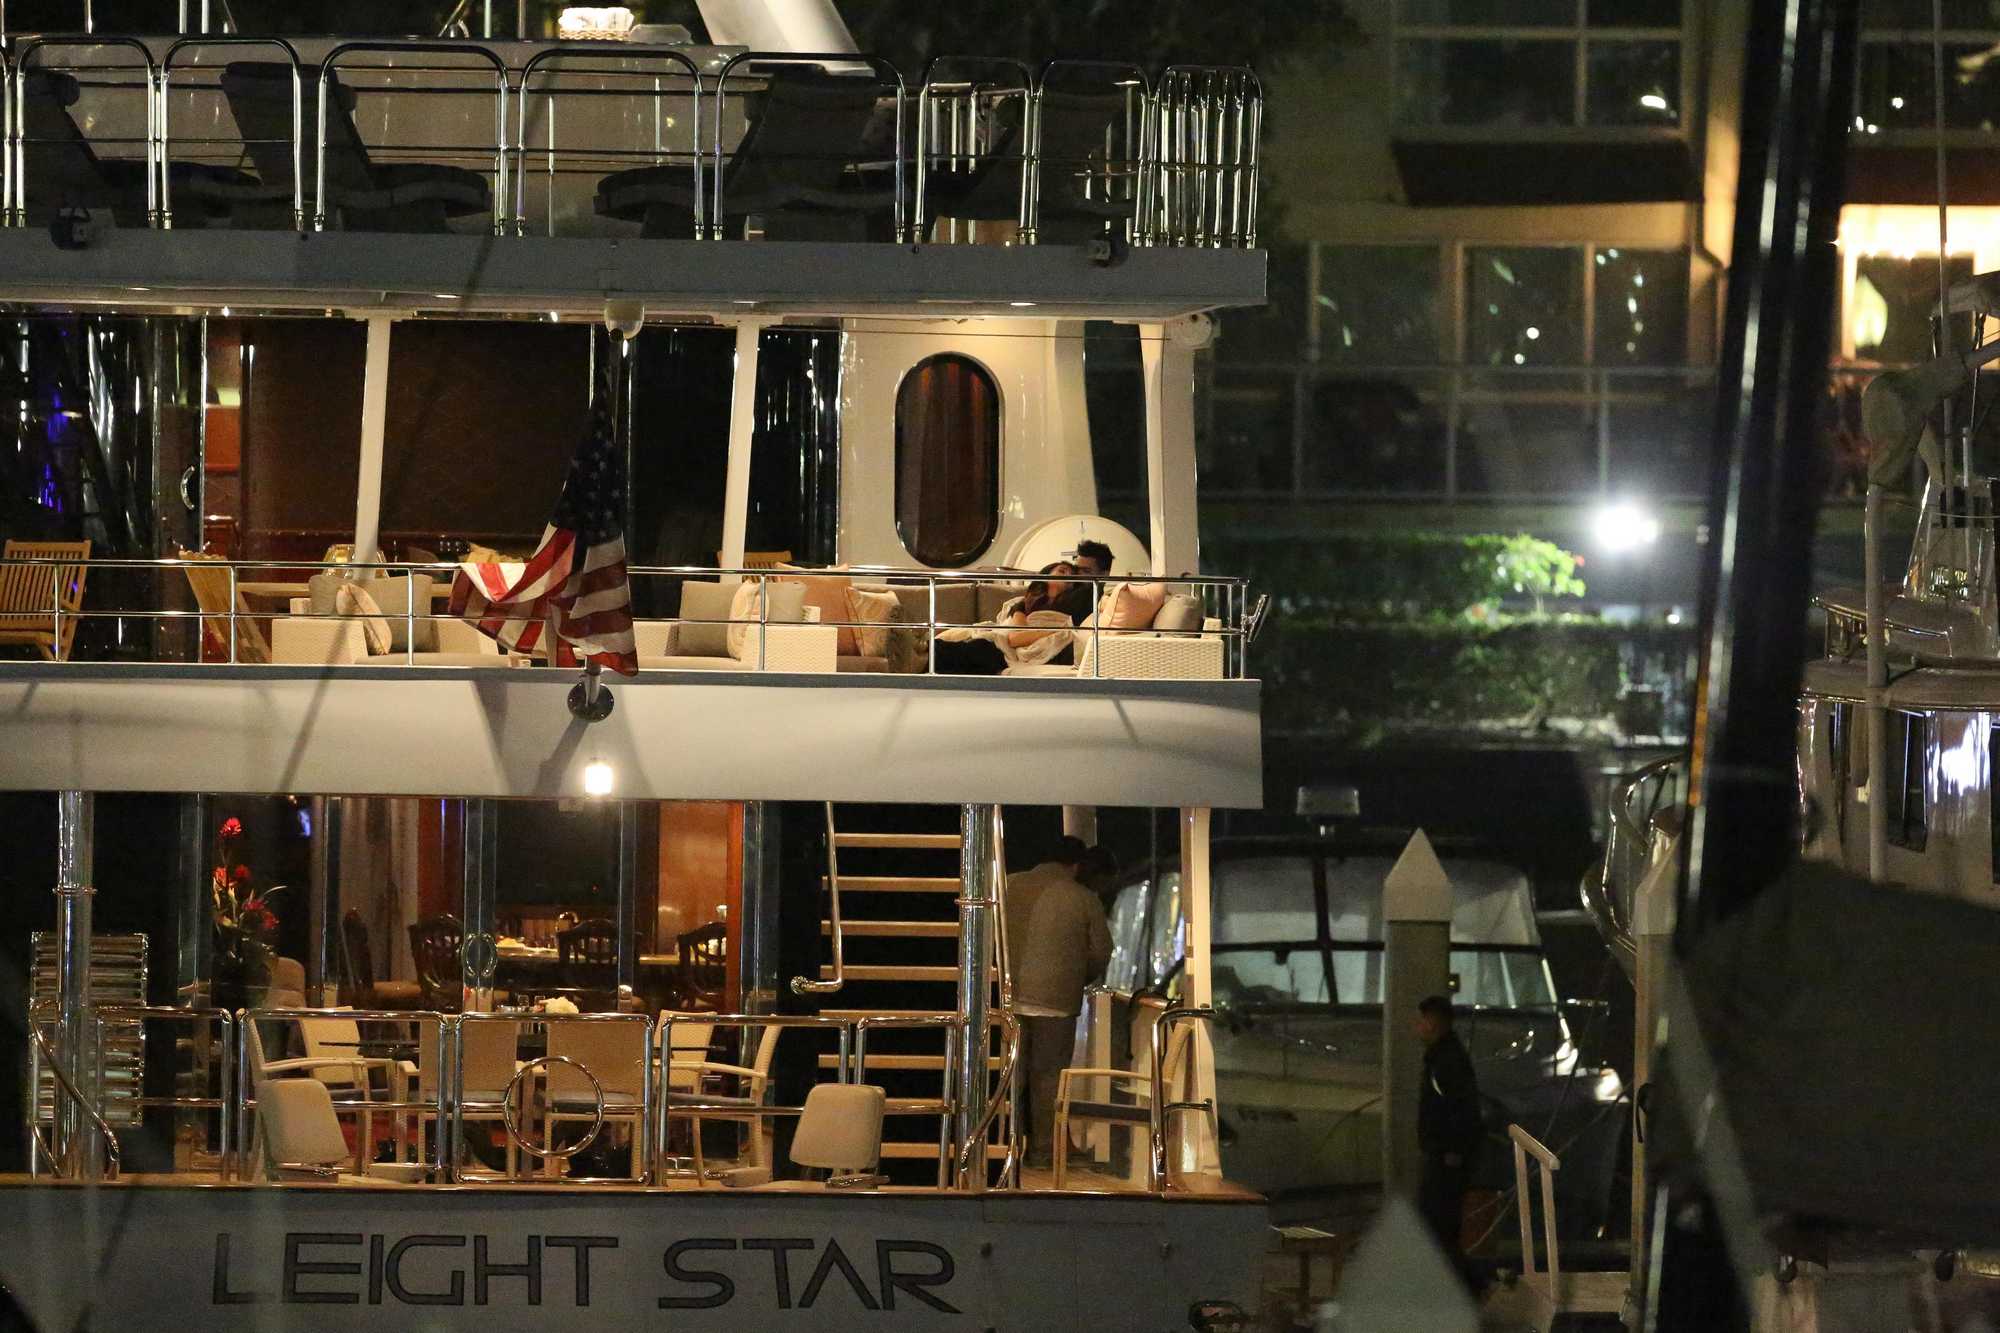 Selena_Gomez_and_The_Weeknd_-_On_a_yacht_in_Marina_del_Rey_on_Feb_11-37.jpg